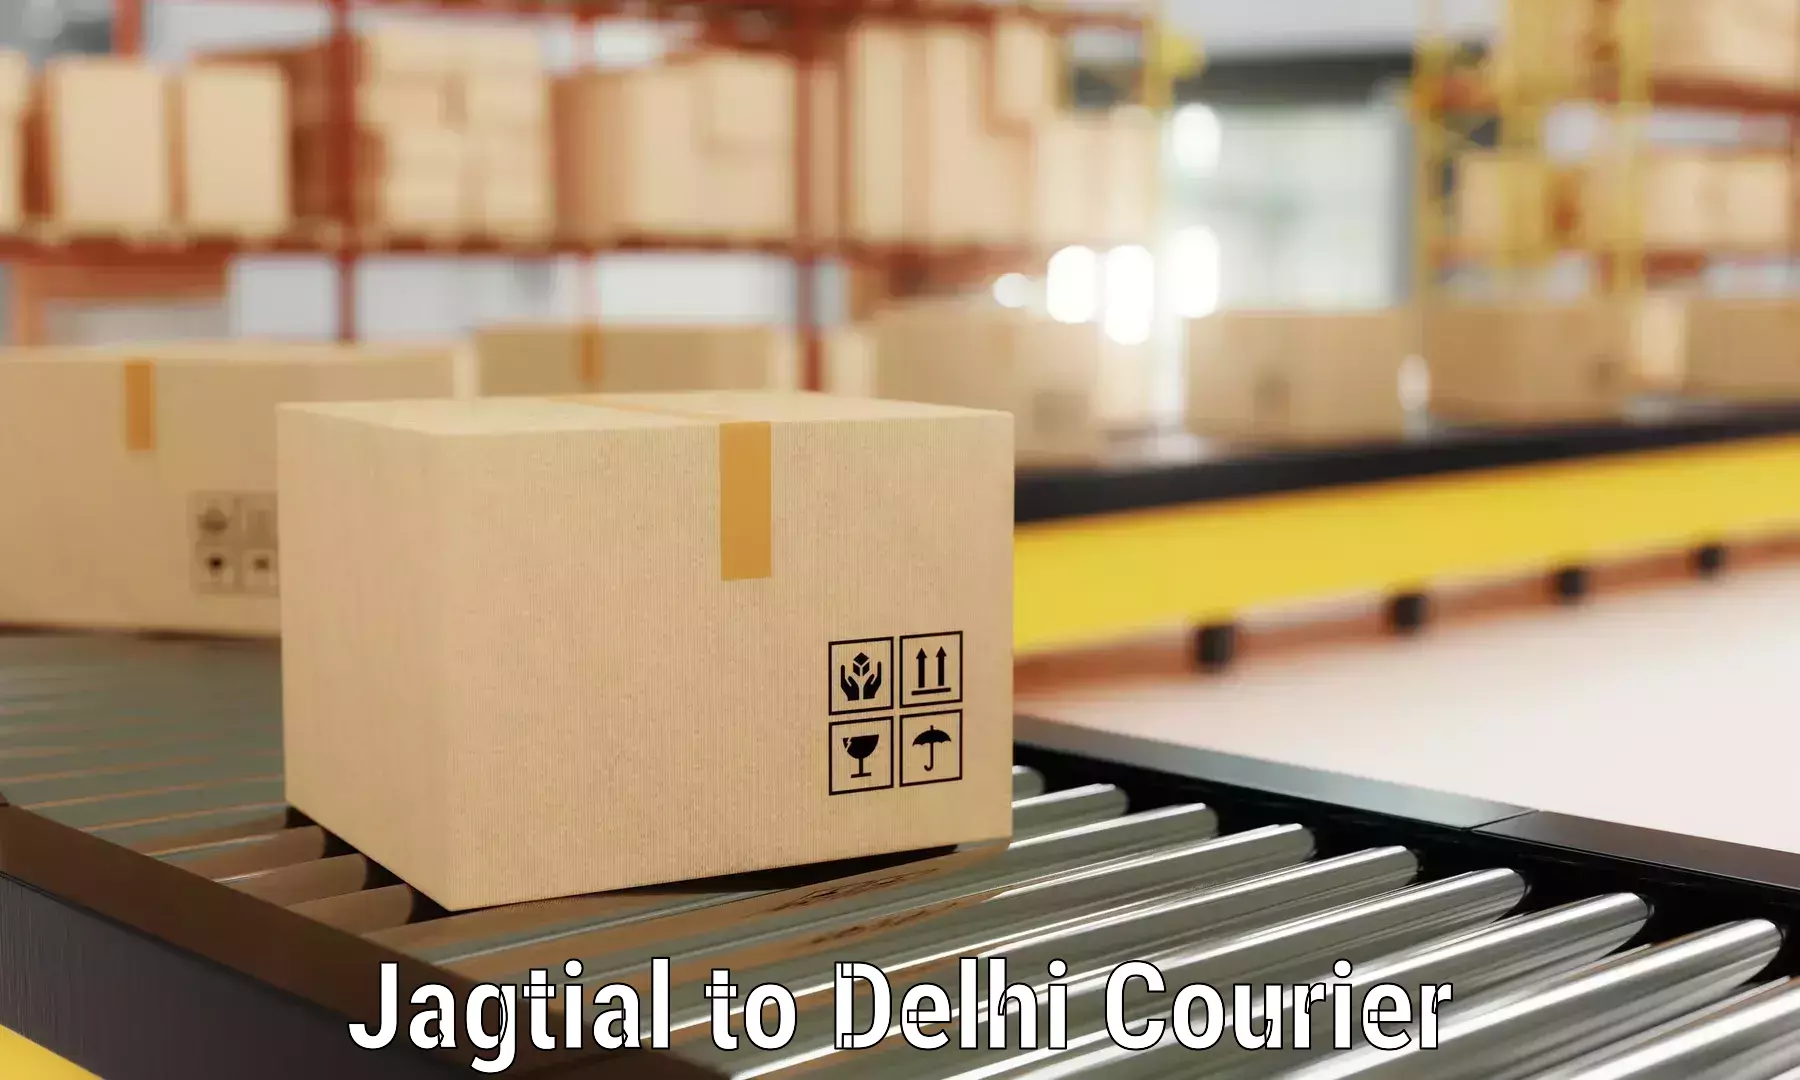 Budget-friendly movers Jagtial to University of Delhi